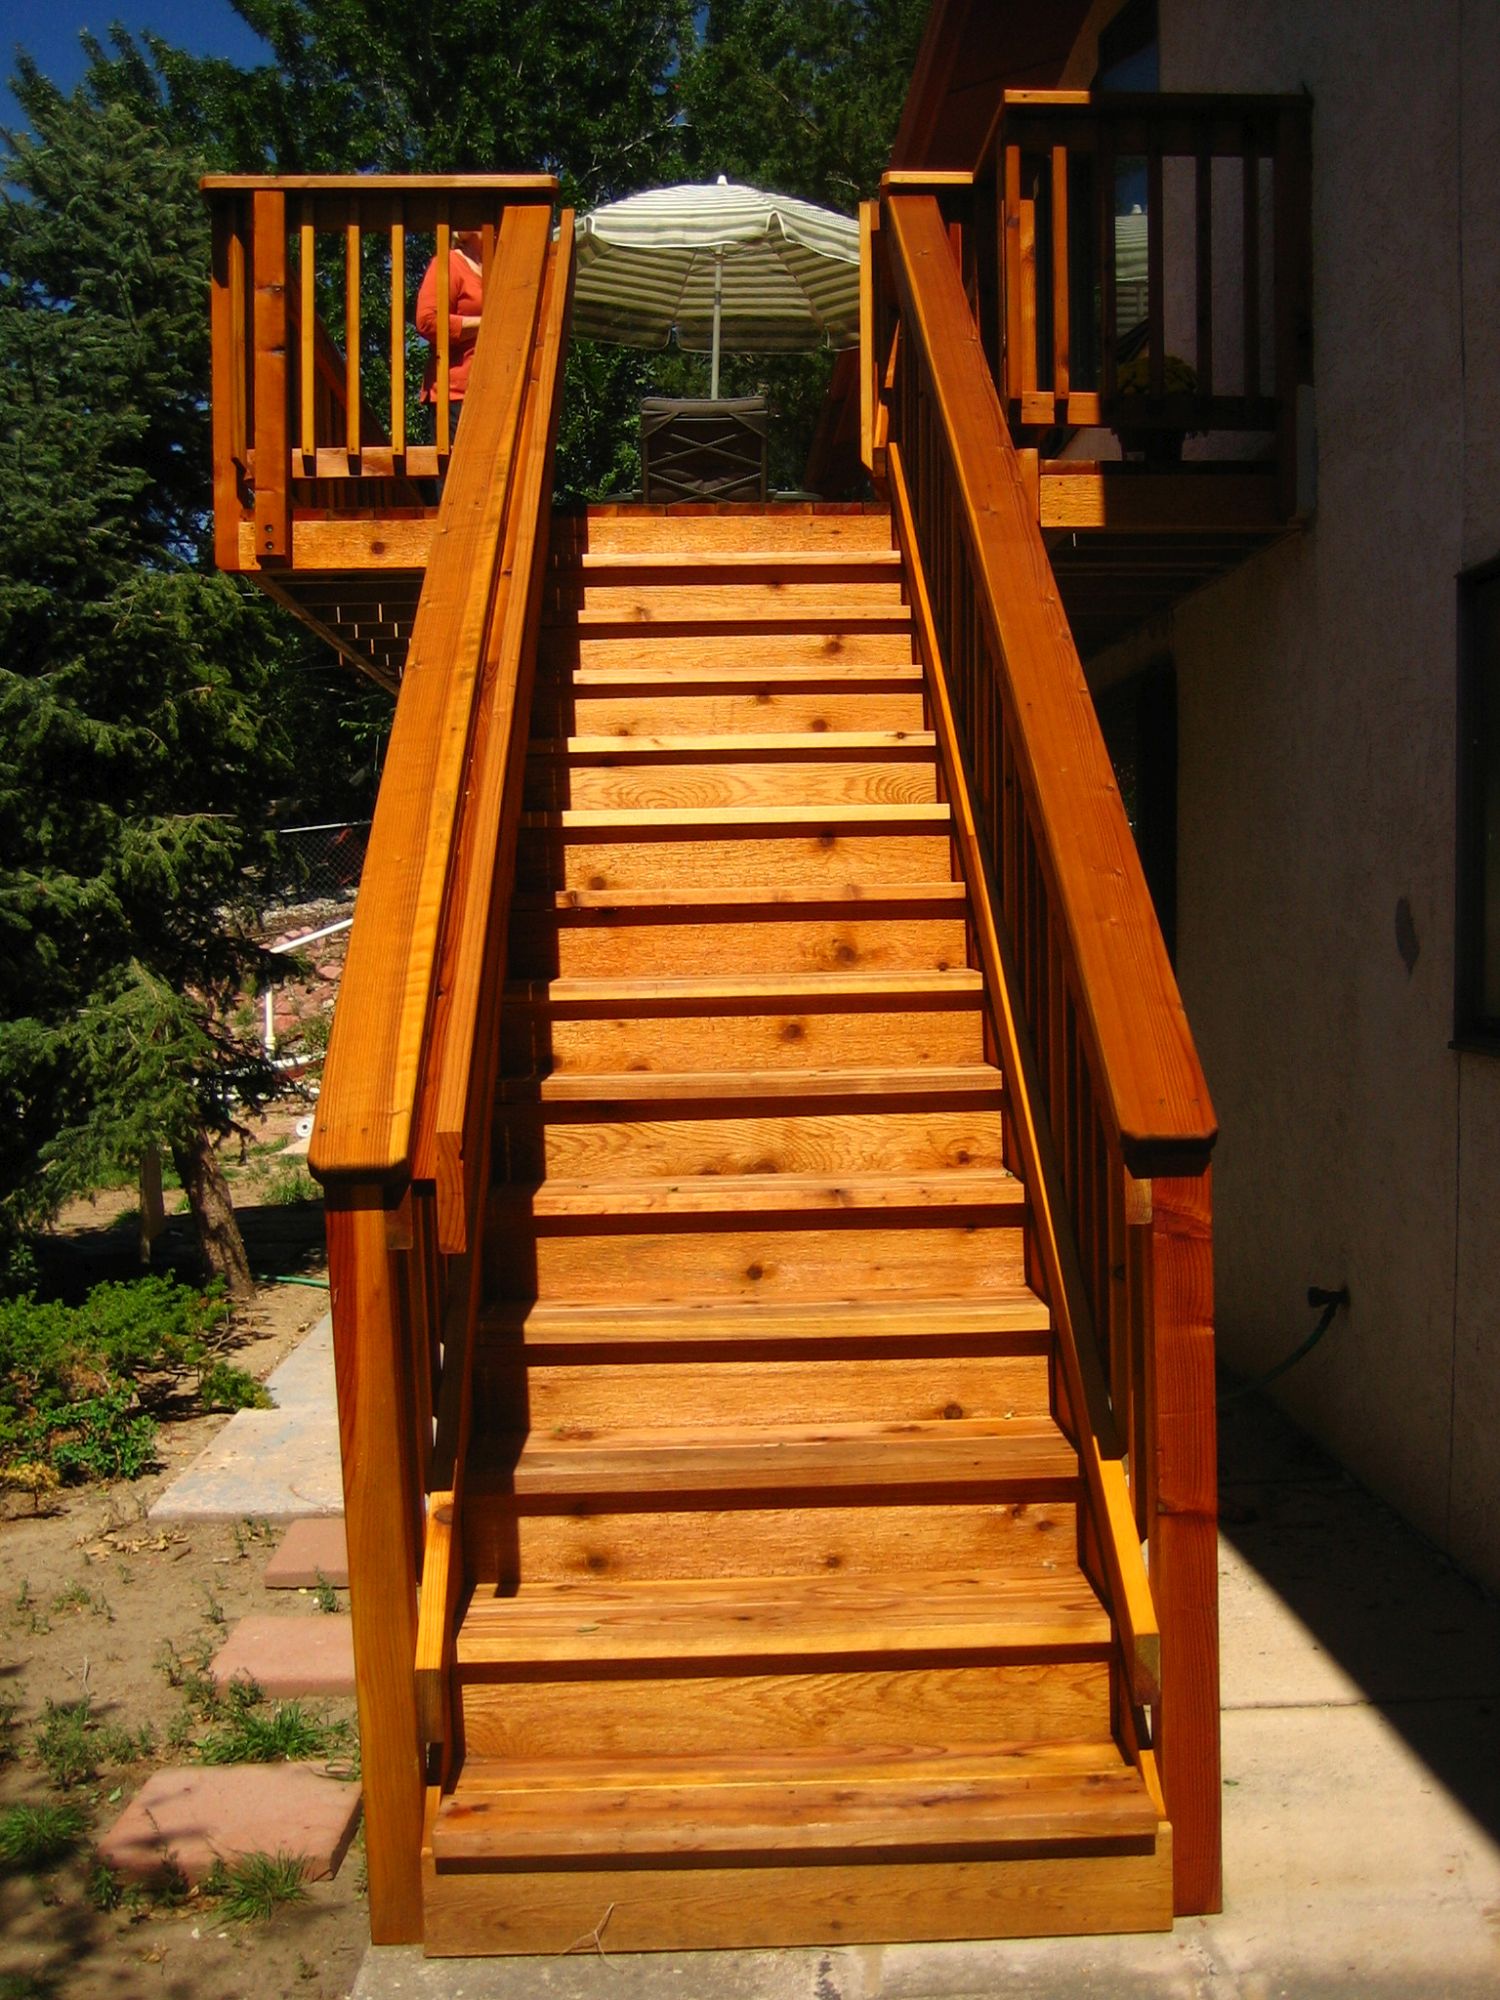 A redwood deck with picket fence railing. It has 3'-wide closed steps.